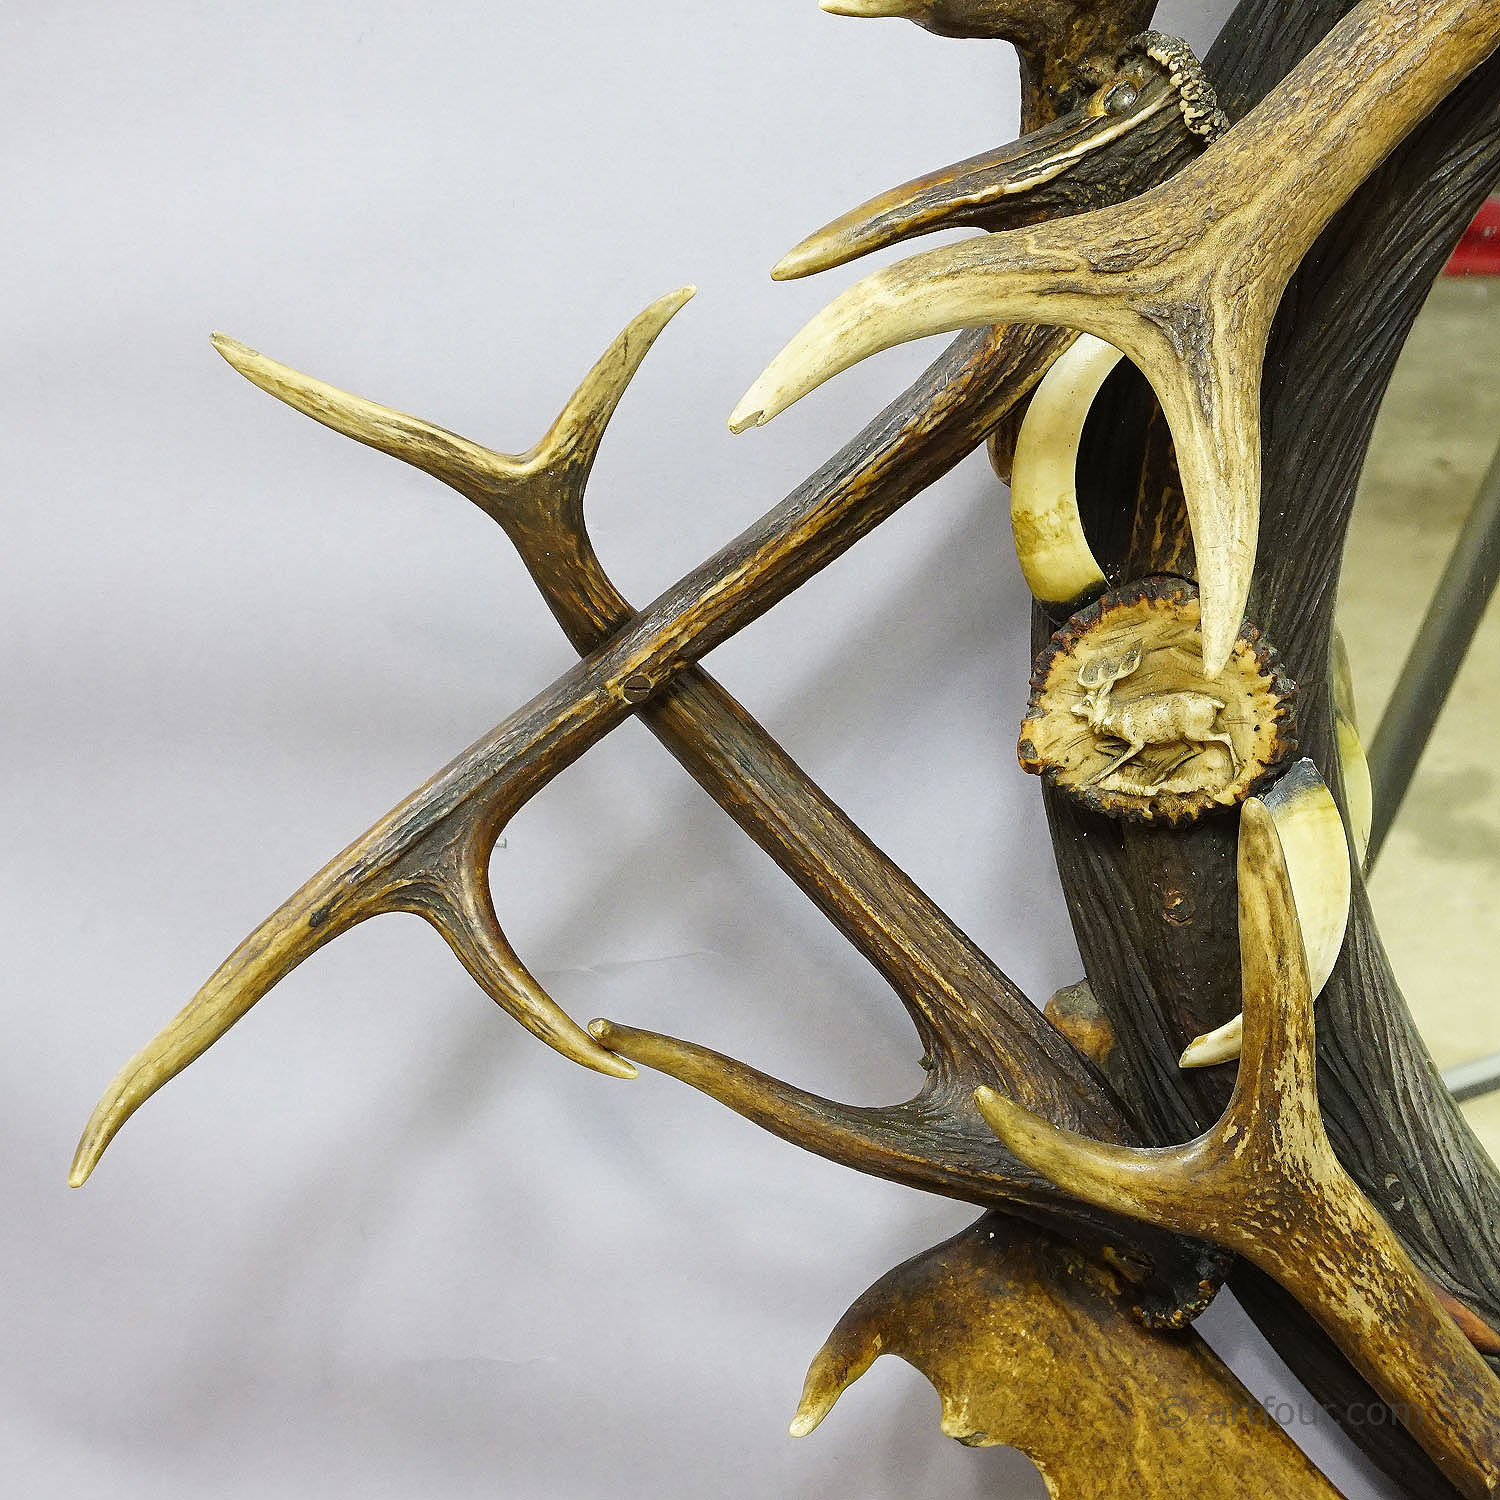 Antique Black Forest Mirror with Rustic Antler Decorations ca. 1900